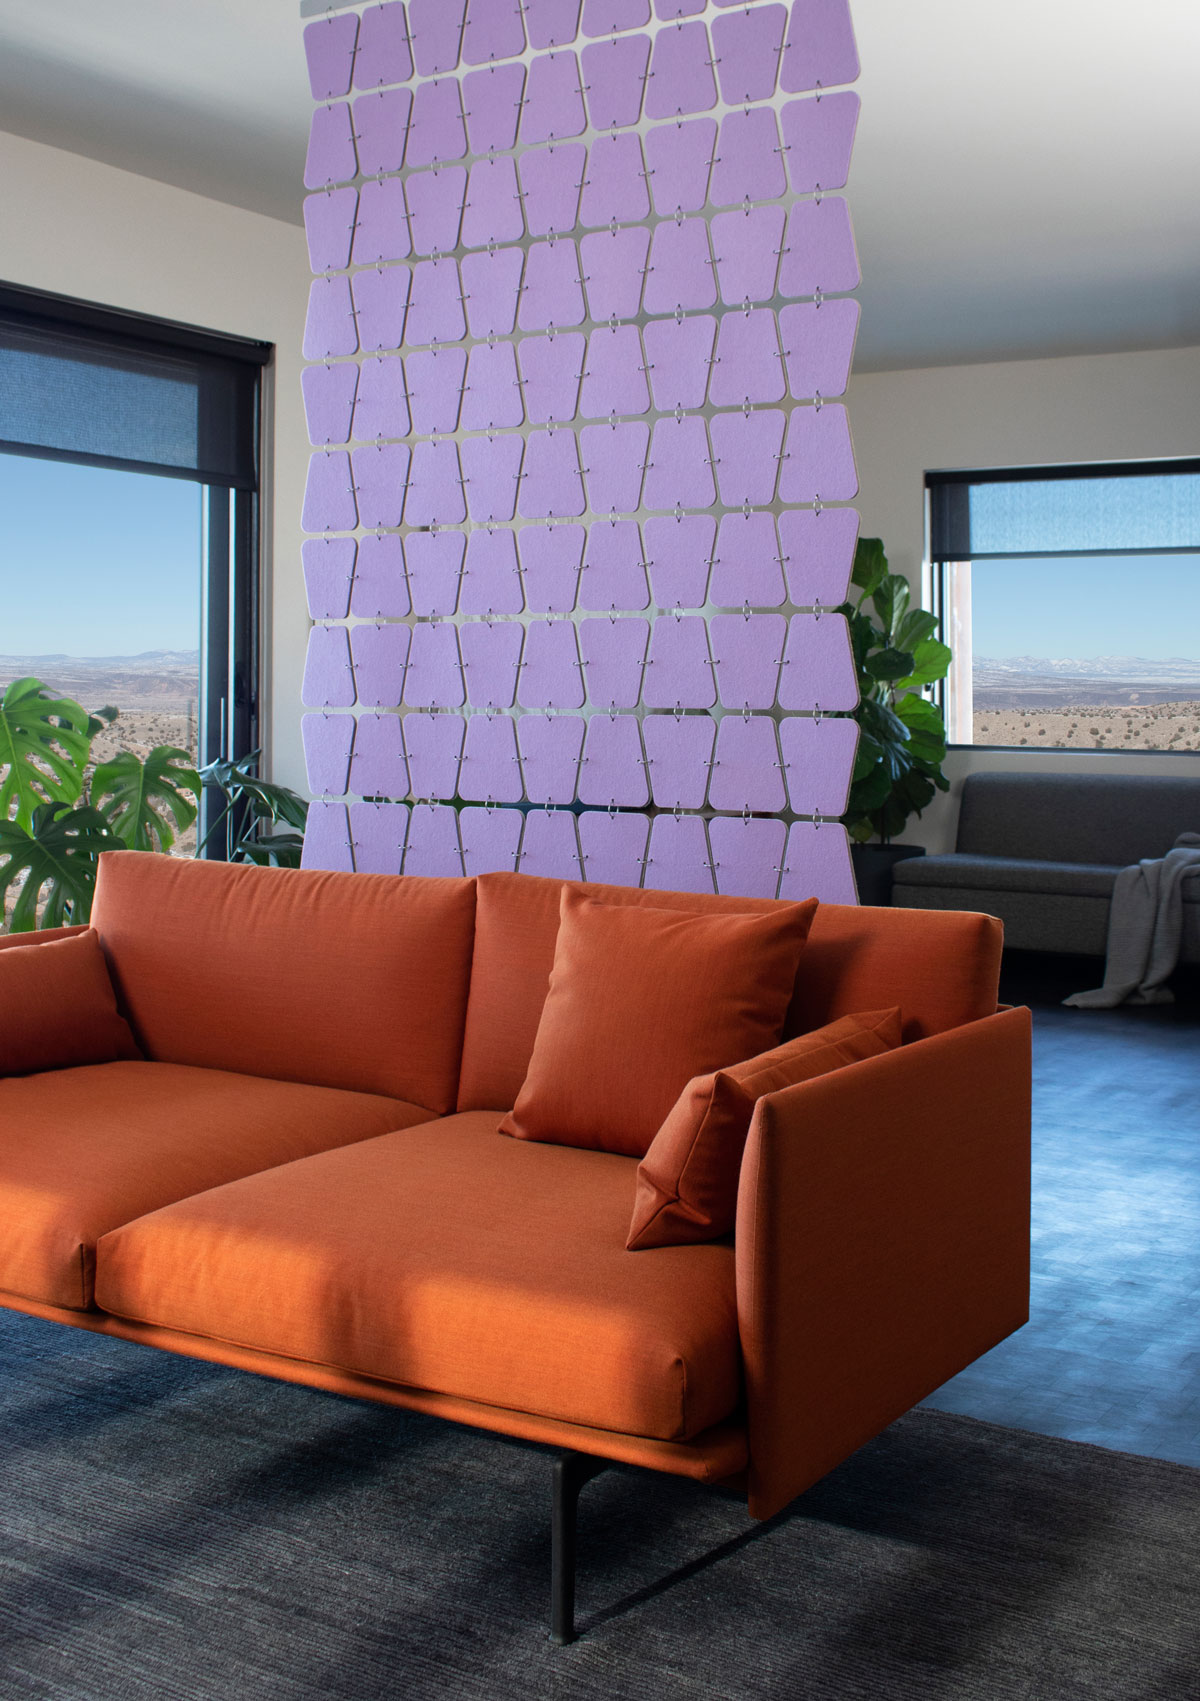 Lavender felt screen with rounded trapezoid shapes hangs behind a modern orange couch in a house